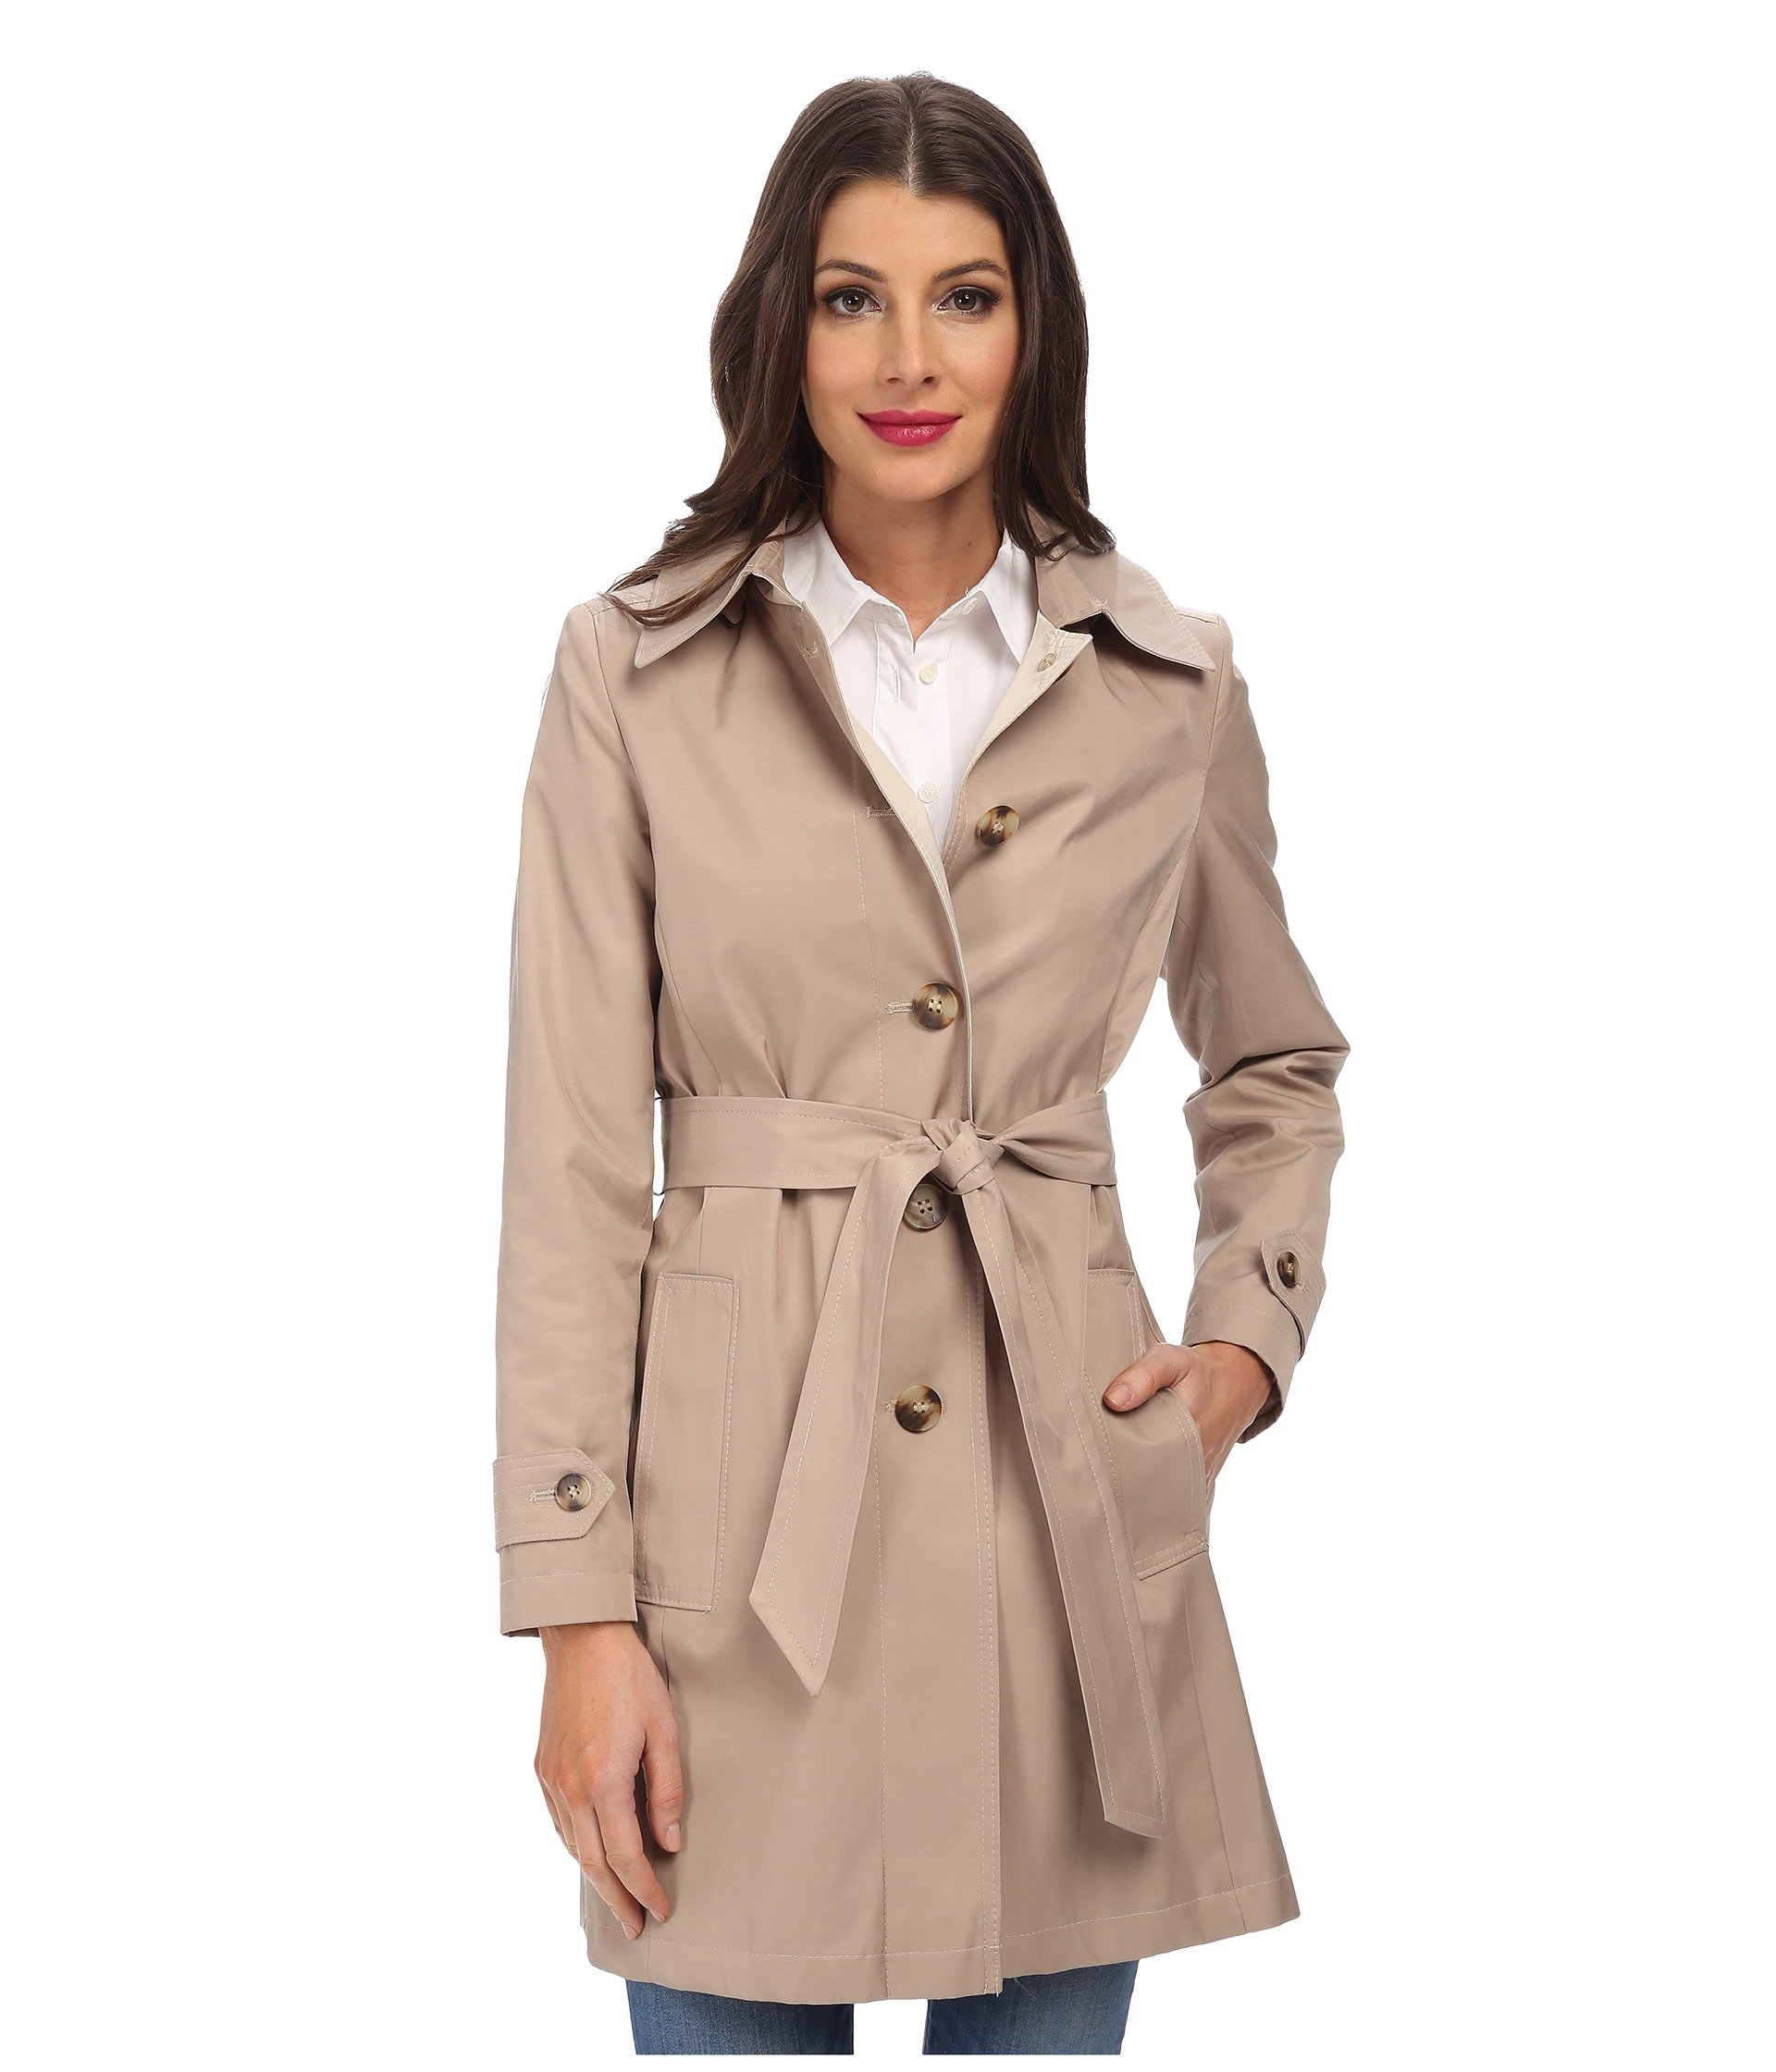 Lyst - Dkny Single Breasted Hooded Belted Trench Coat in Natural